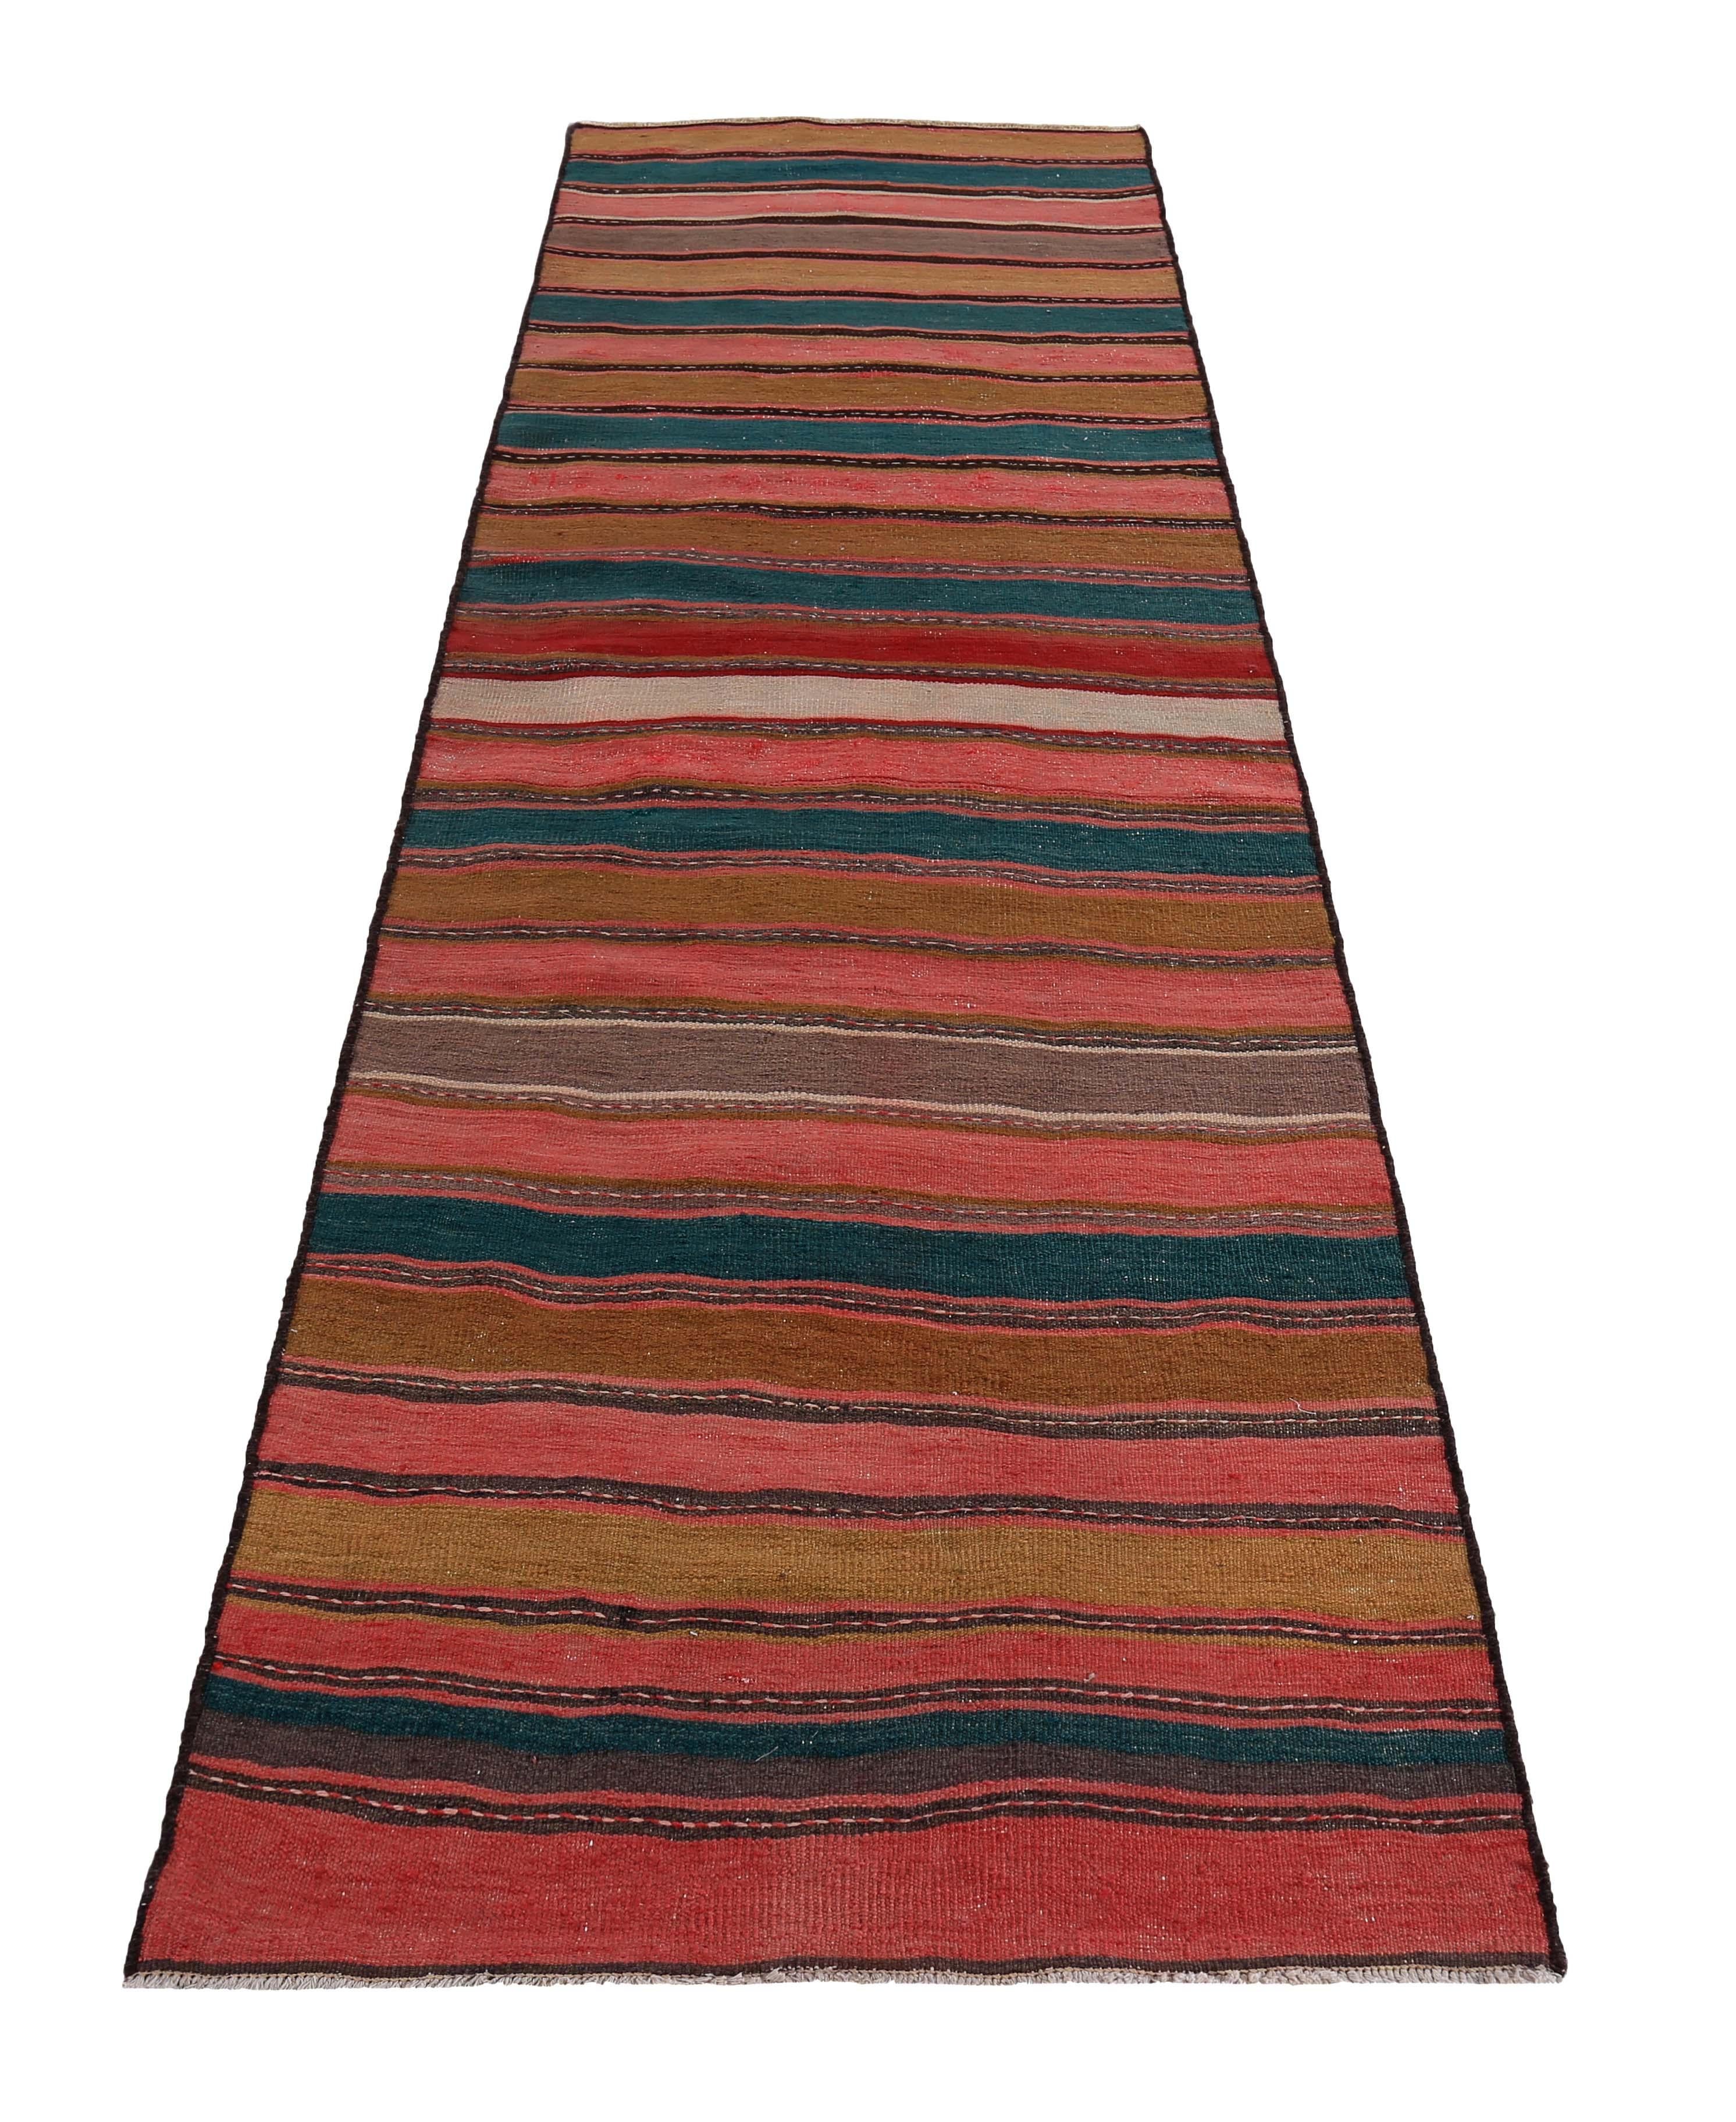 Modern Turkish runner rug handwoven from the finest sheep’s wool and colored with all-natural vegetable dyes that are safe for humans and pets. It’s a traditional Kilim flat-weave design featuring green, red and brown stripes. It’s a stunning piece